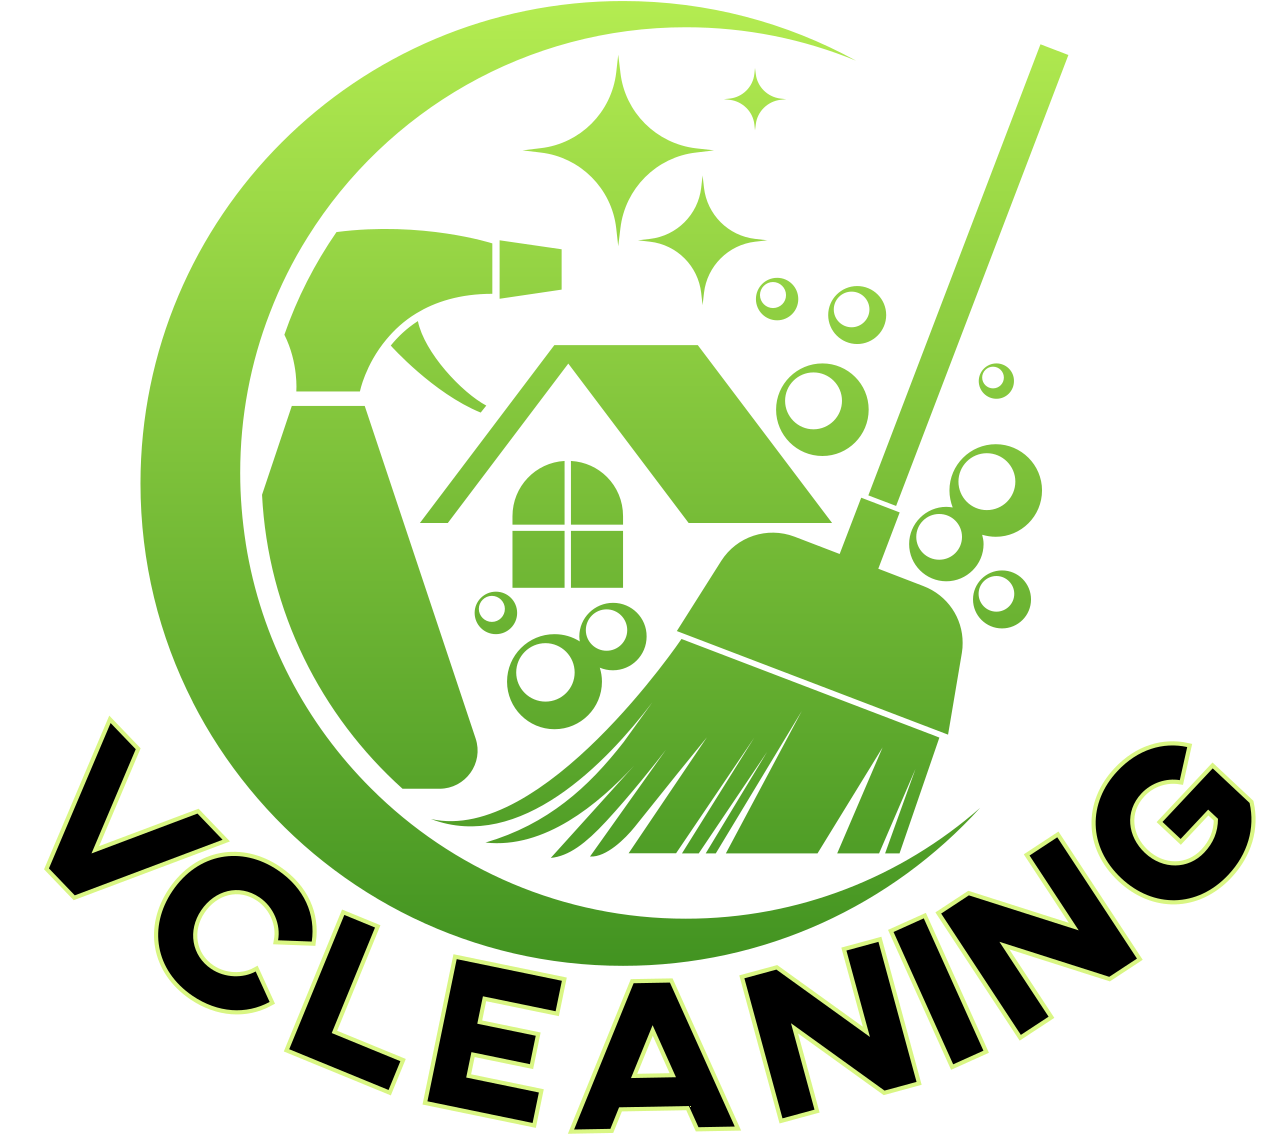 VCLEANING's logo